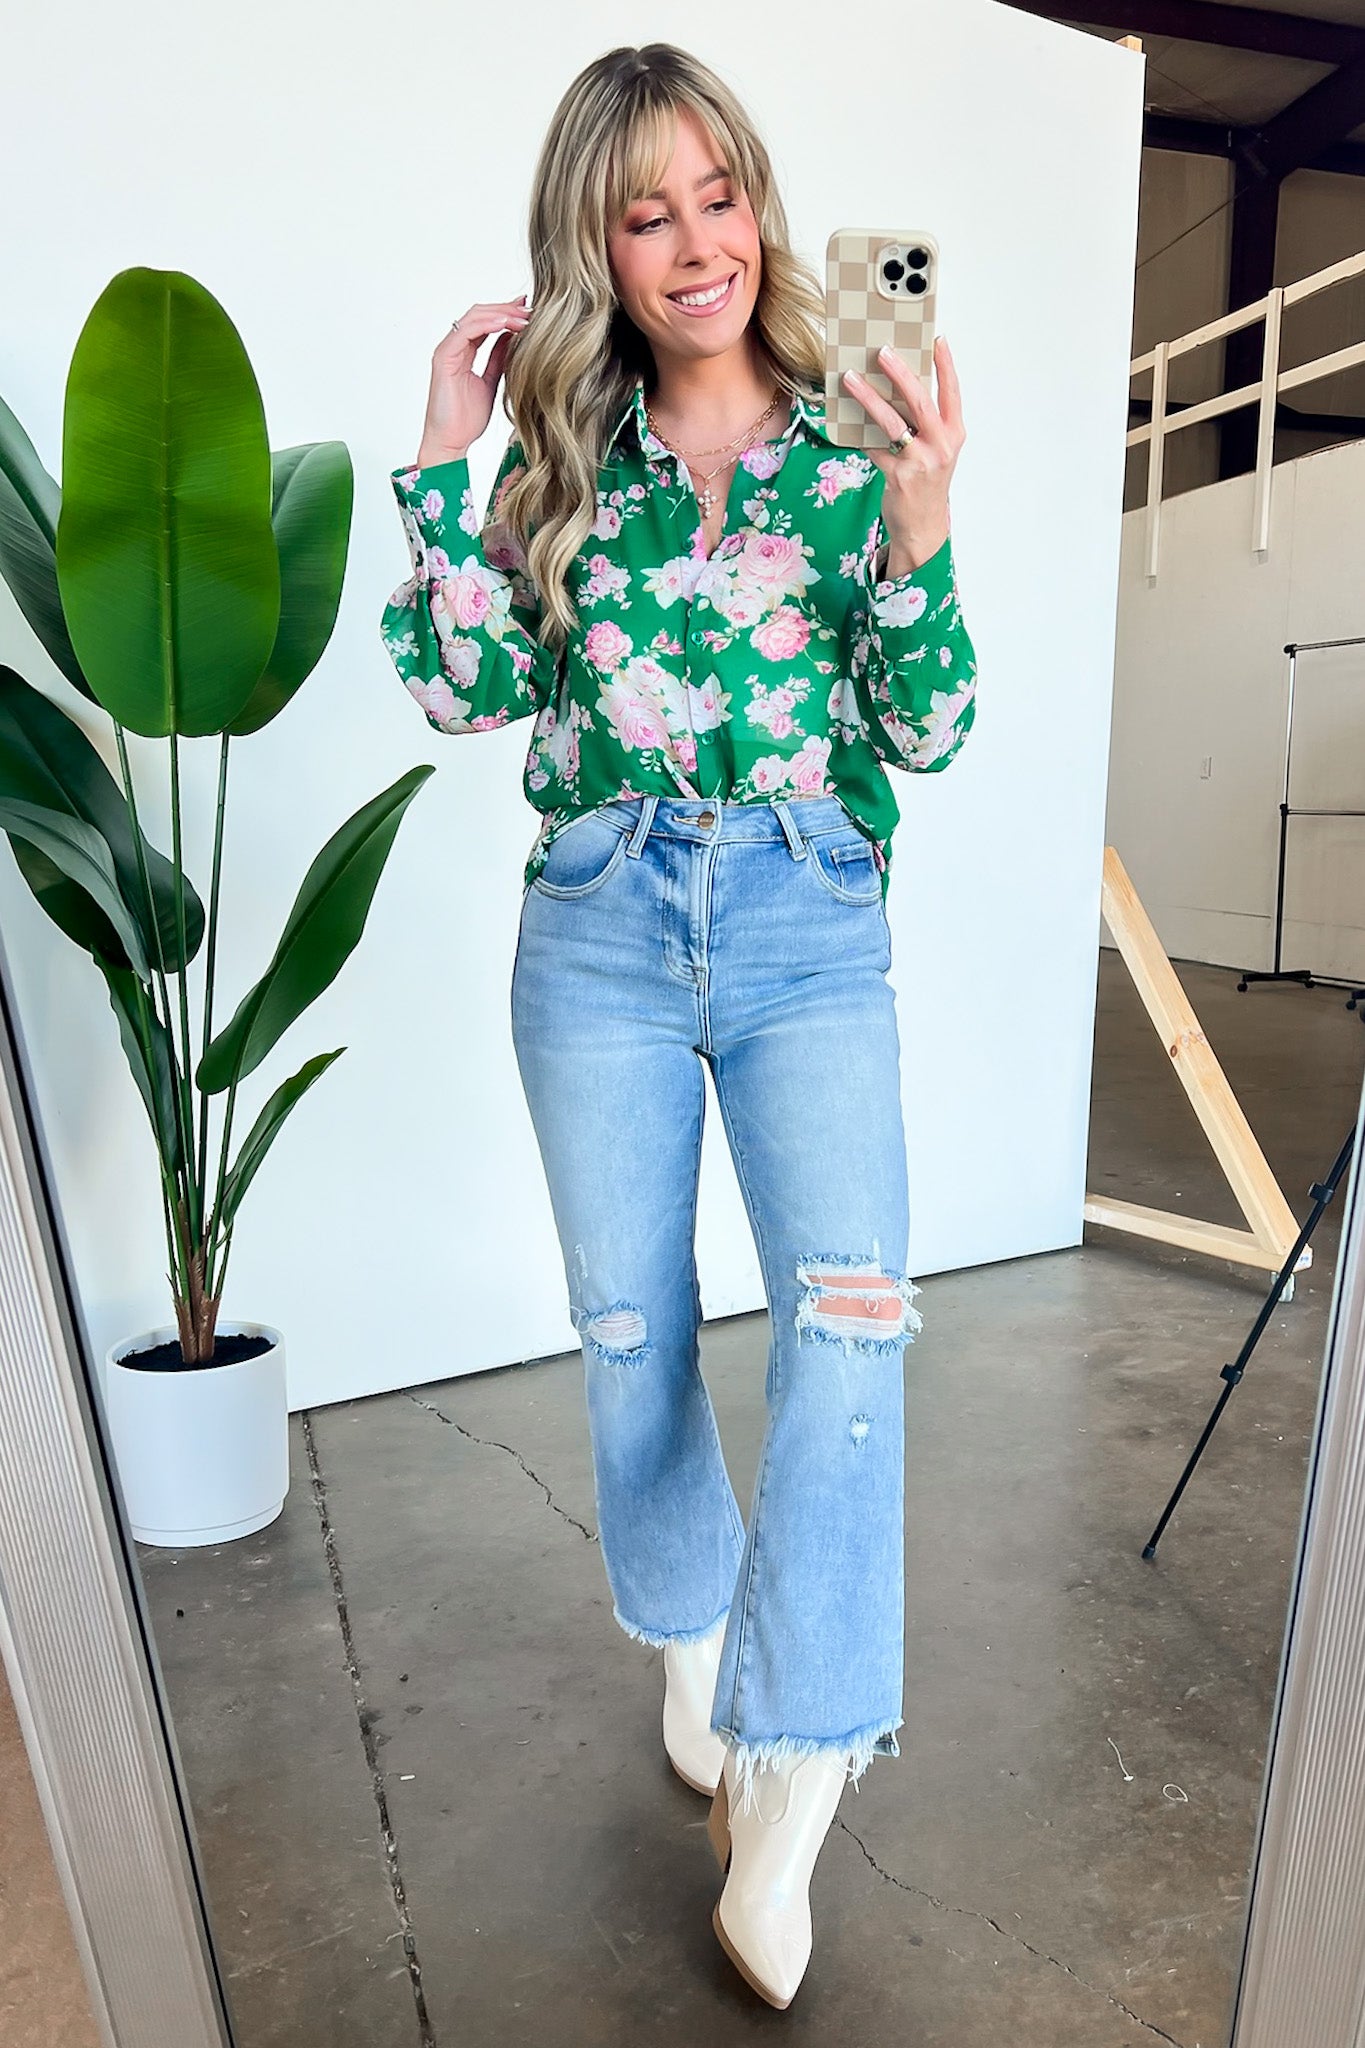  Freshly Floral Button Down Top - FINAL SALE - Madison and Mallory